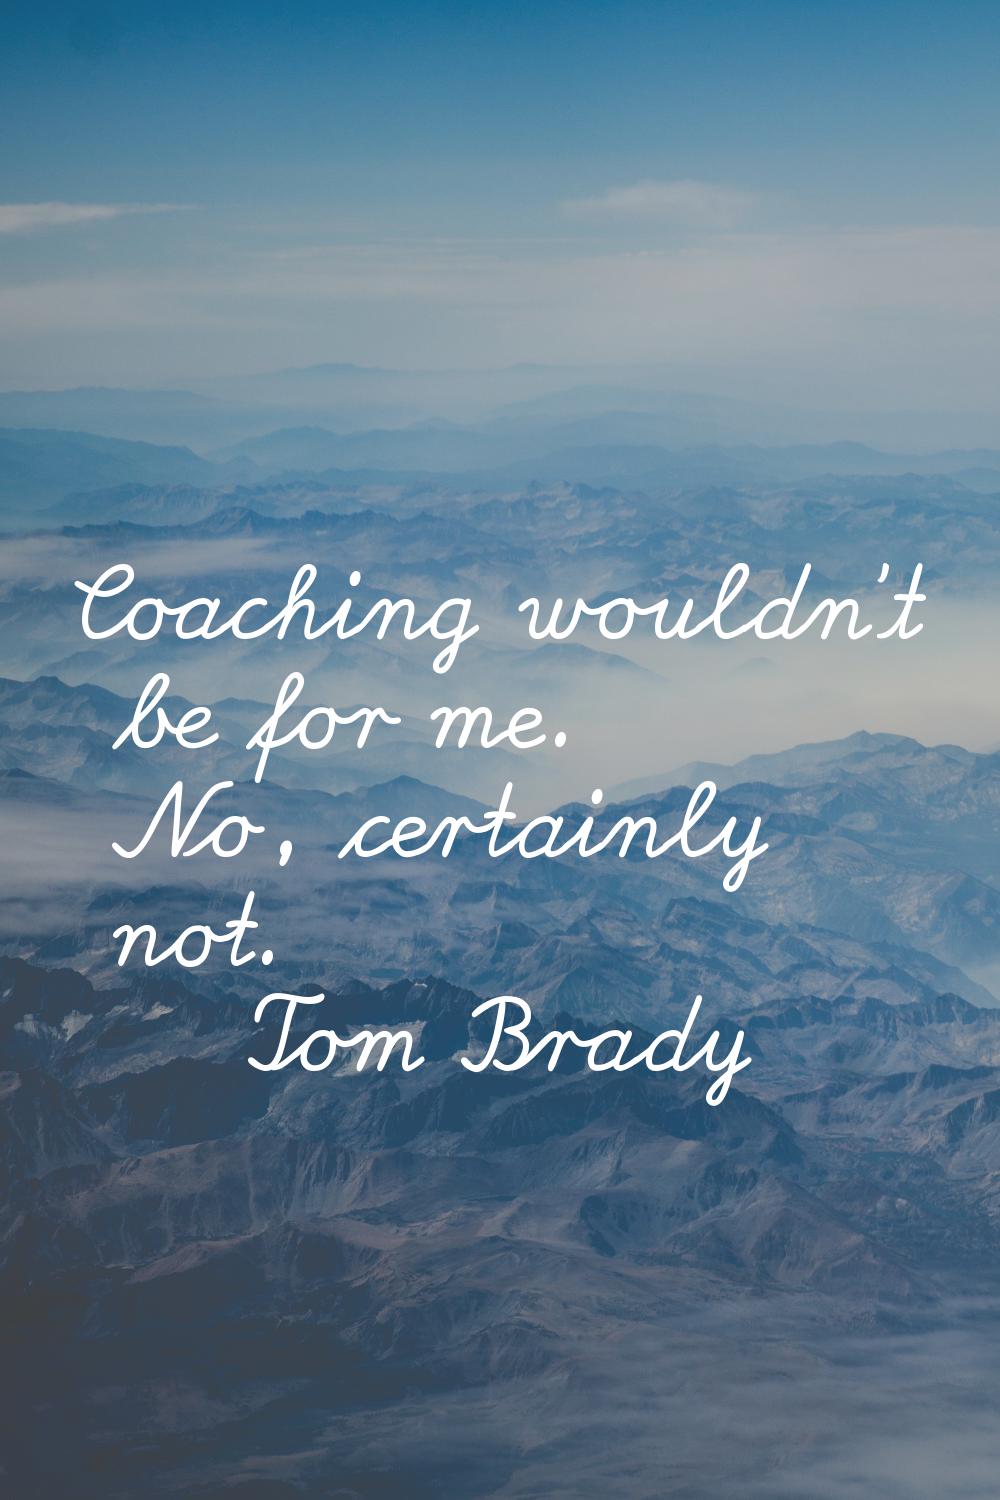 Coaching wouldn't be for me. No, certainly not.